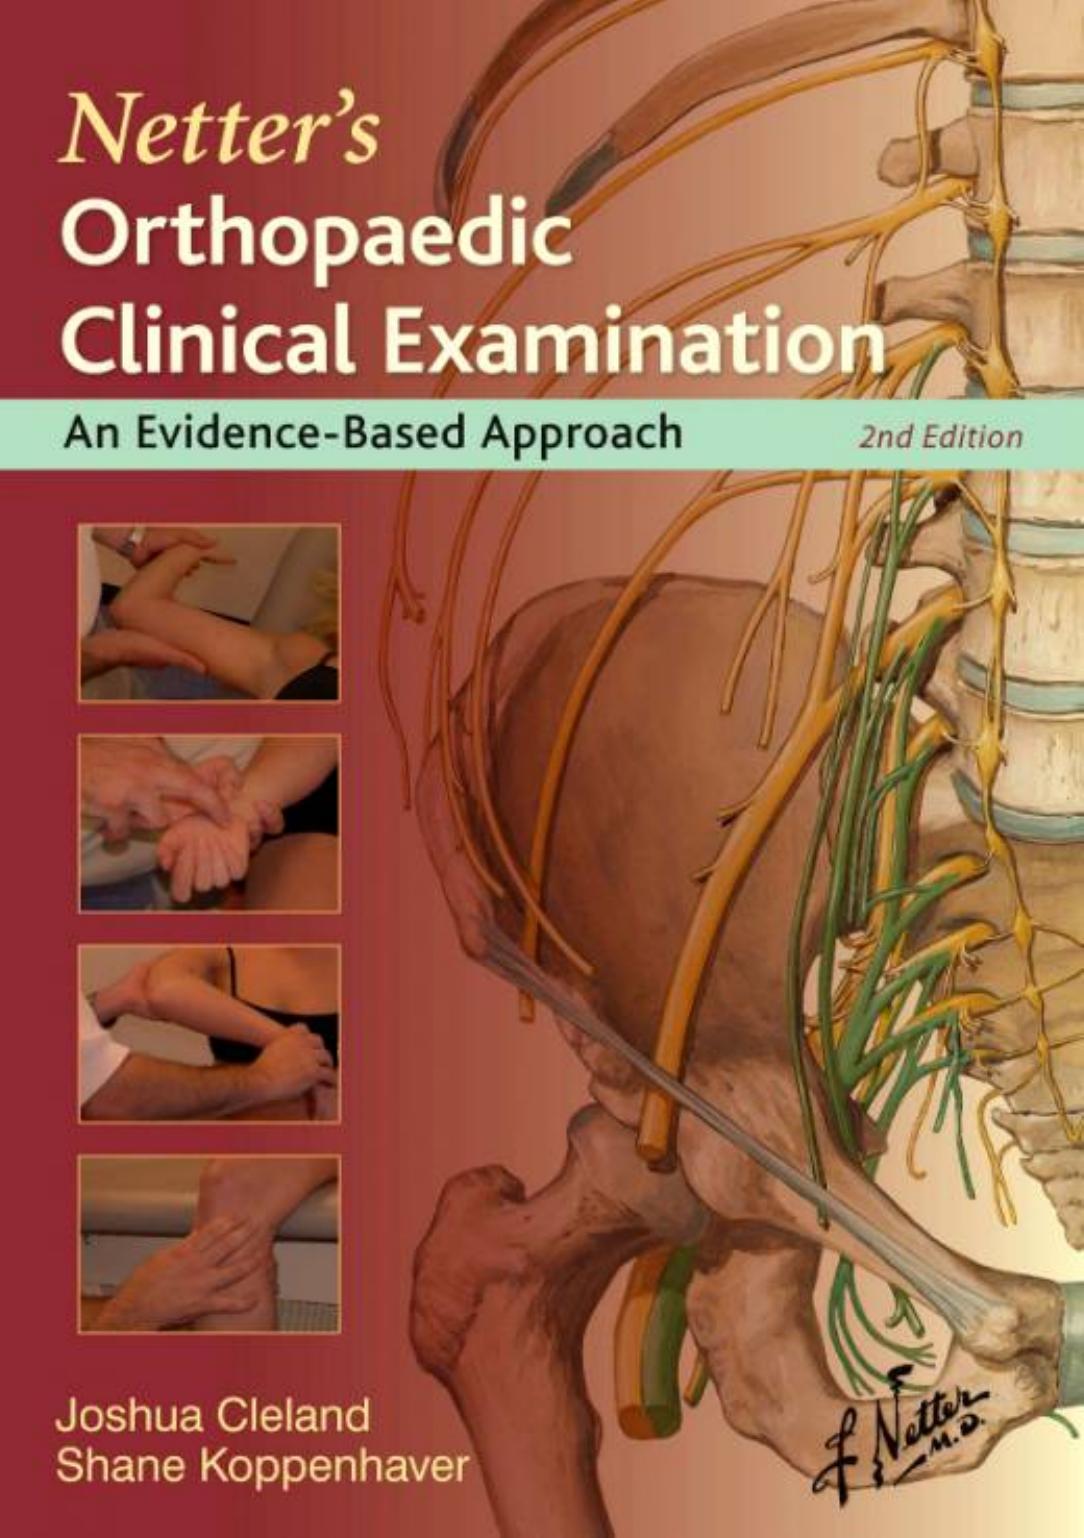 Netter's Orthopaedic Clinical Examination: An Evidence-Based Approach, Second Edition